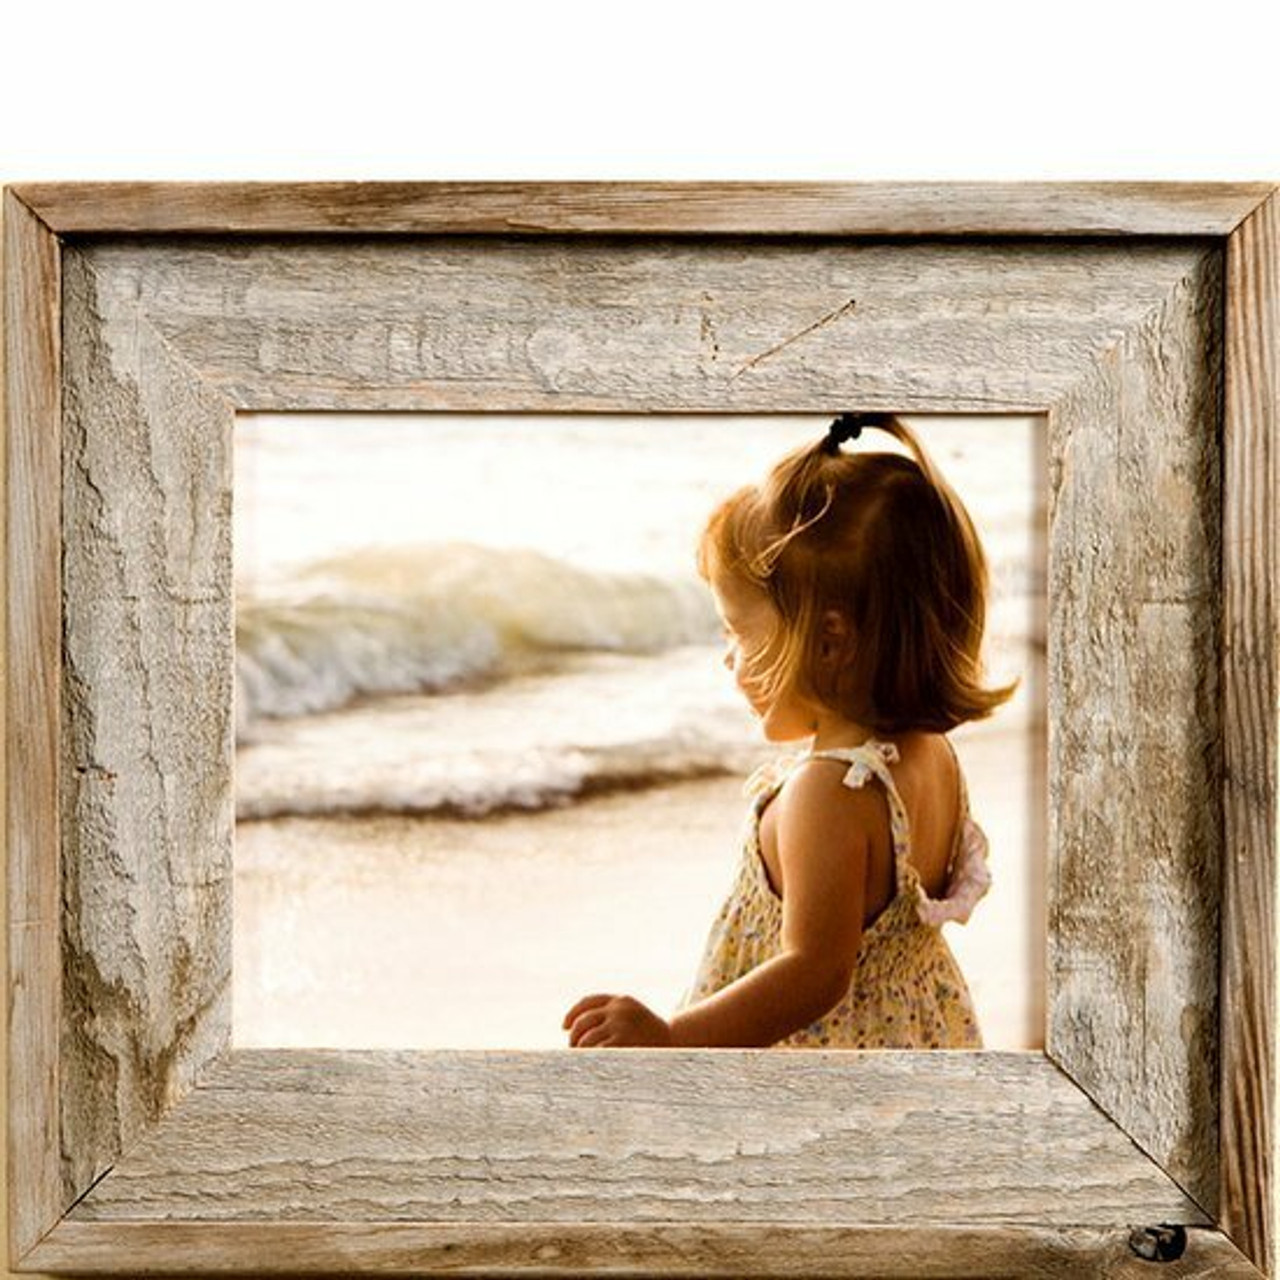 BARNWOODUSA | Farmhouse 4x4 Picture Frame | 1 1/2 inch Molding | 100%  Reclaimed Wood | Rustic | Natural Weathered Gray